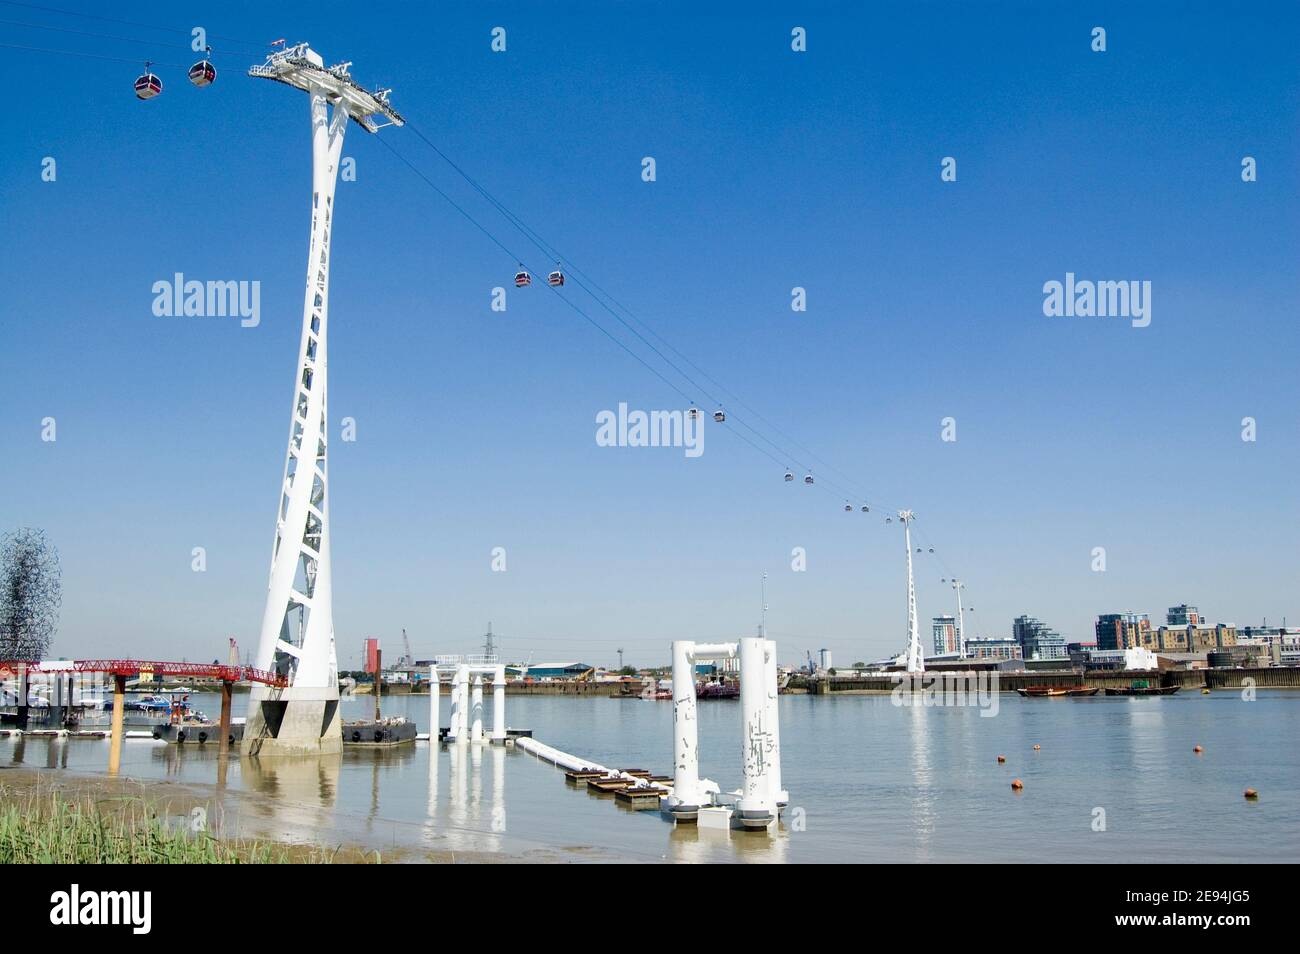 View of the new cable car public transport link between Greenwich and Docklands in the East of London.  View from public footpath. Stock Photo